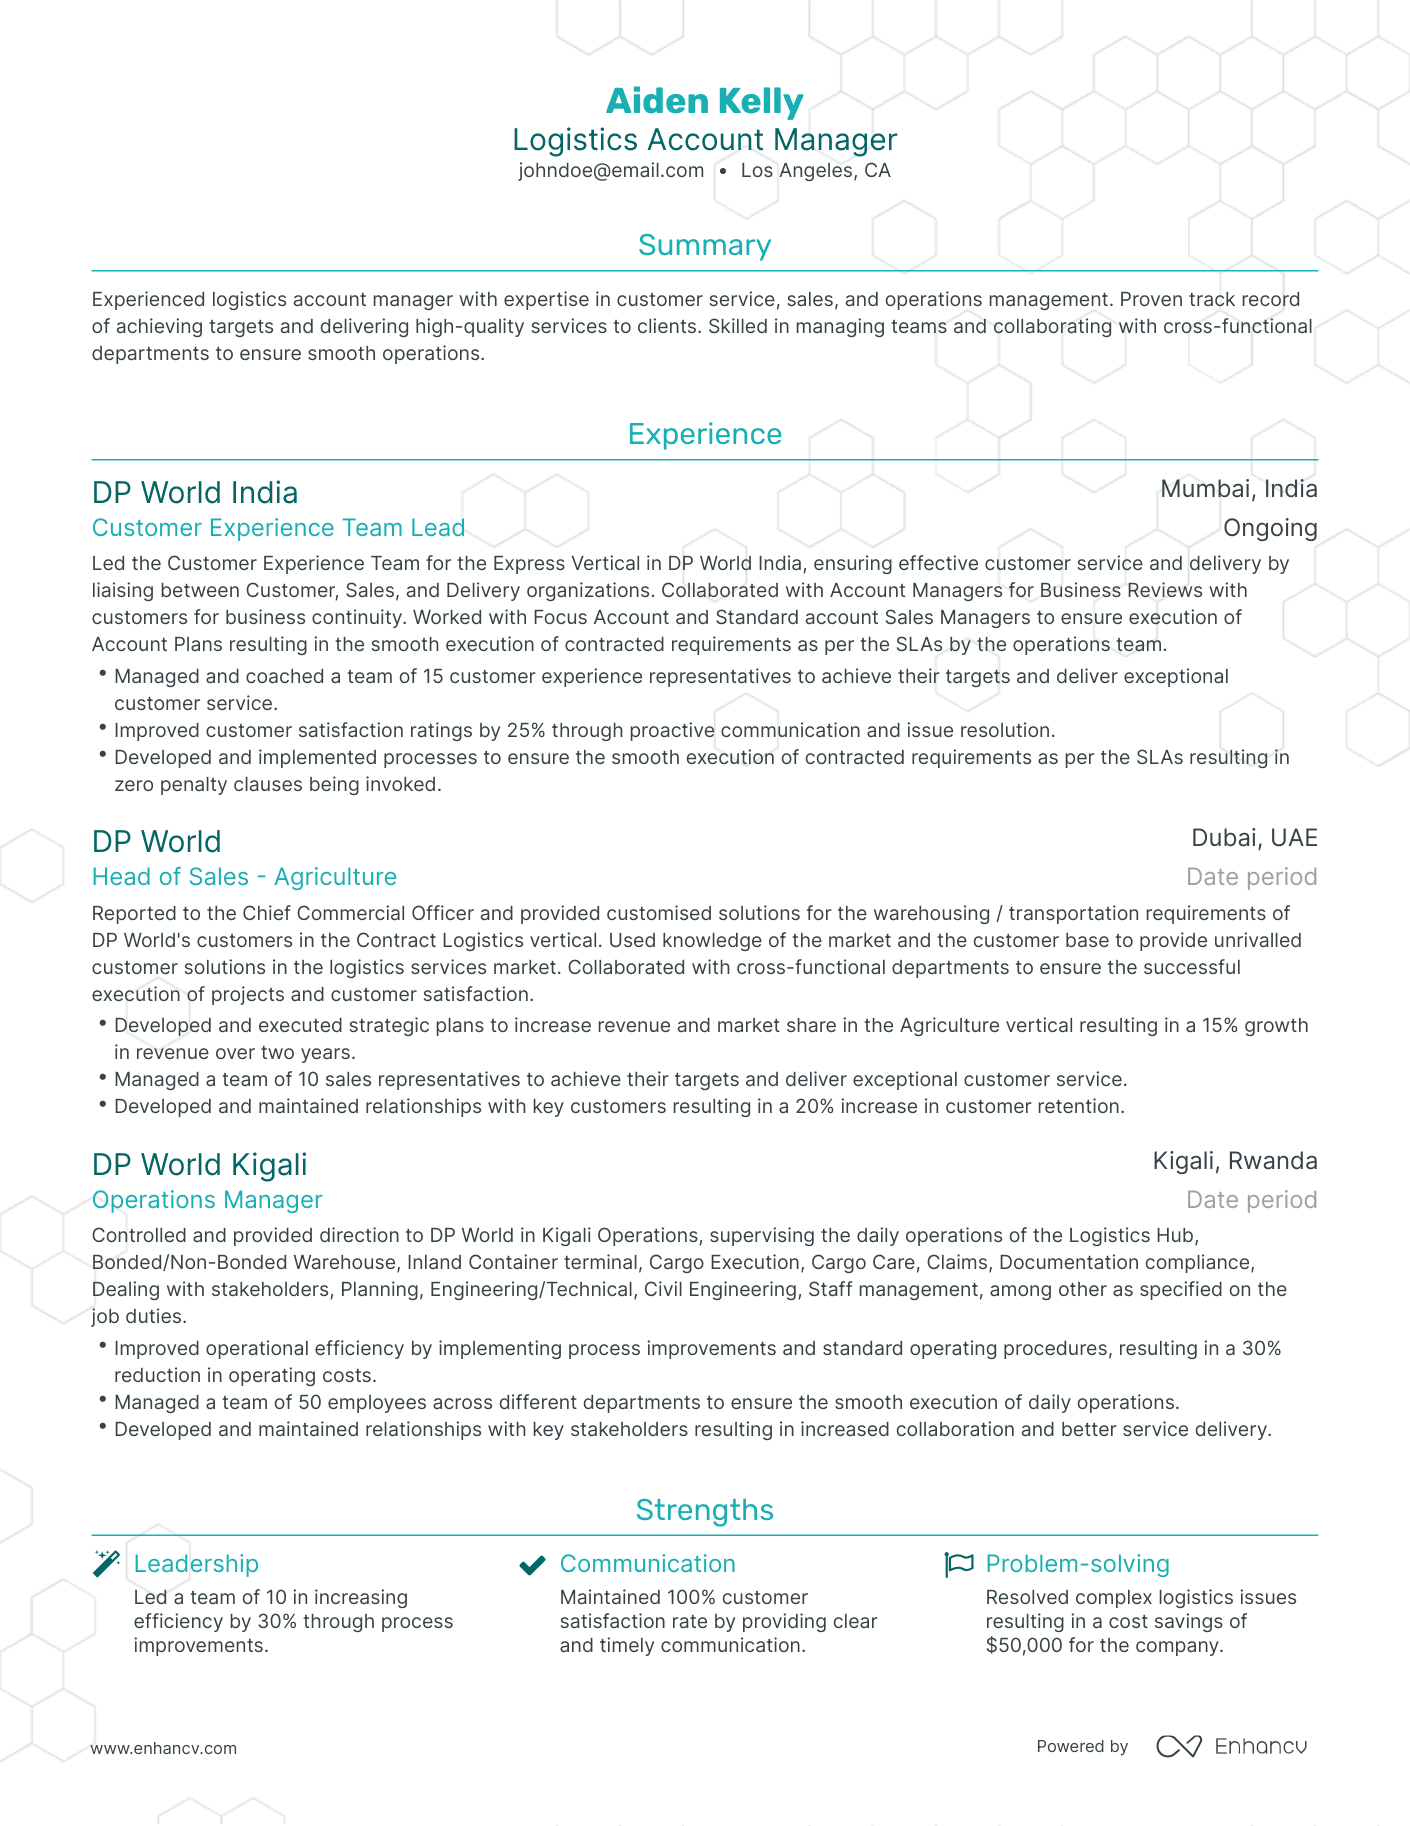 Traditional Logistics Account Manager Resume Template